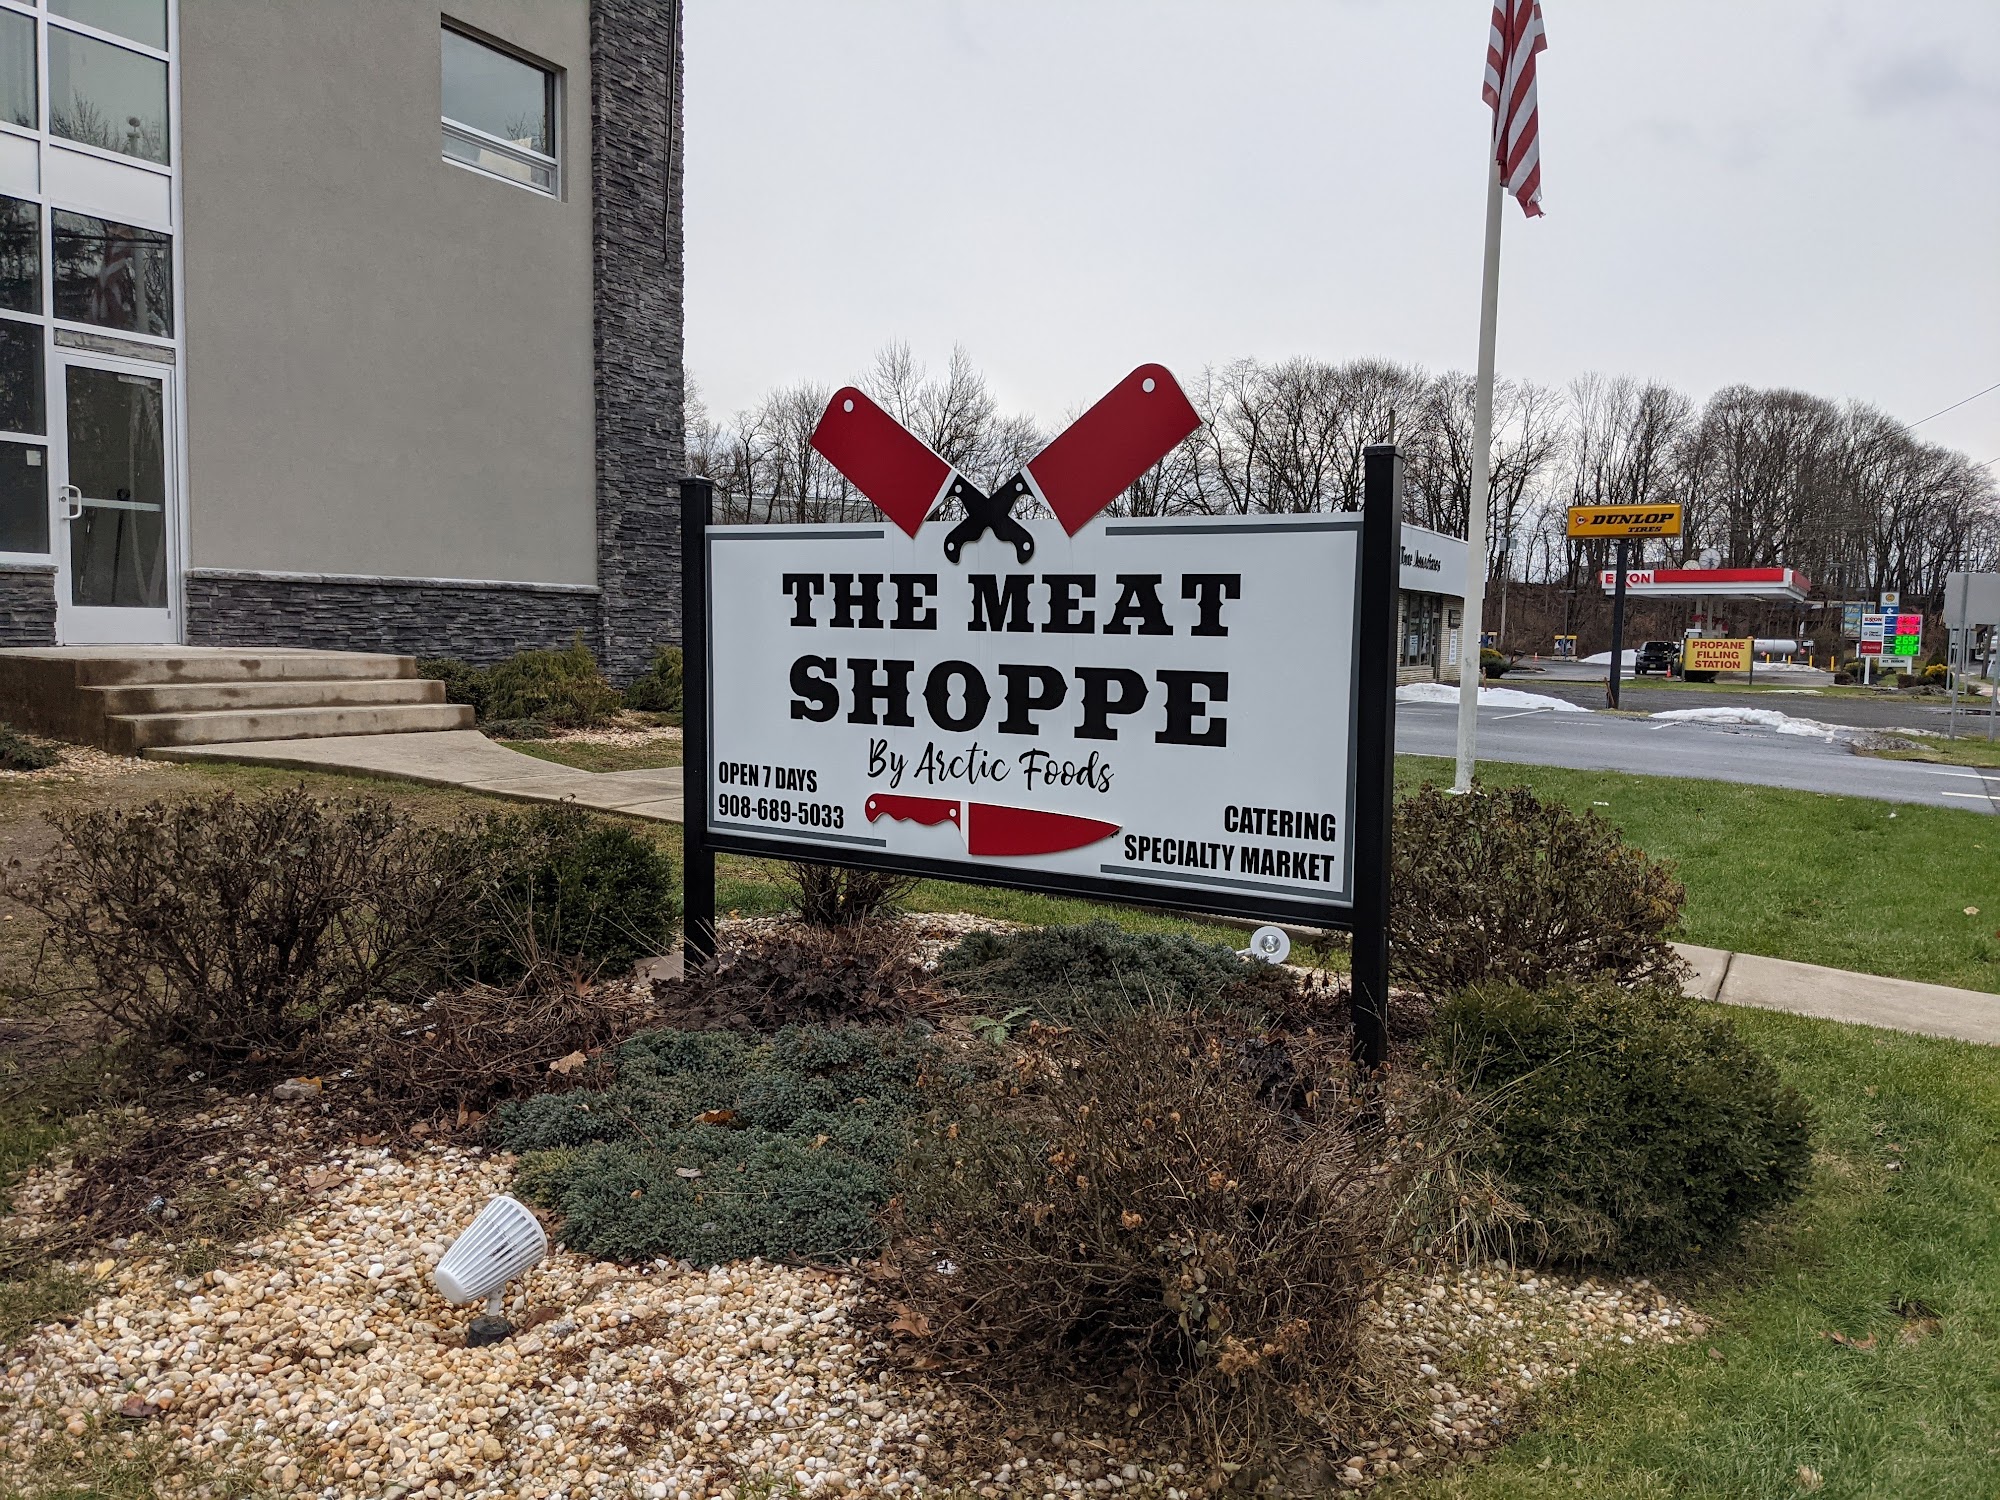 The Meat Shoppe by Arctic Foods